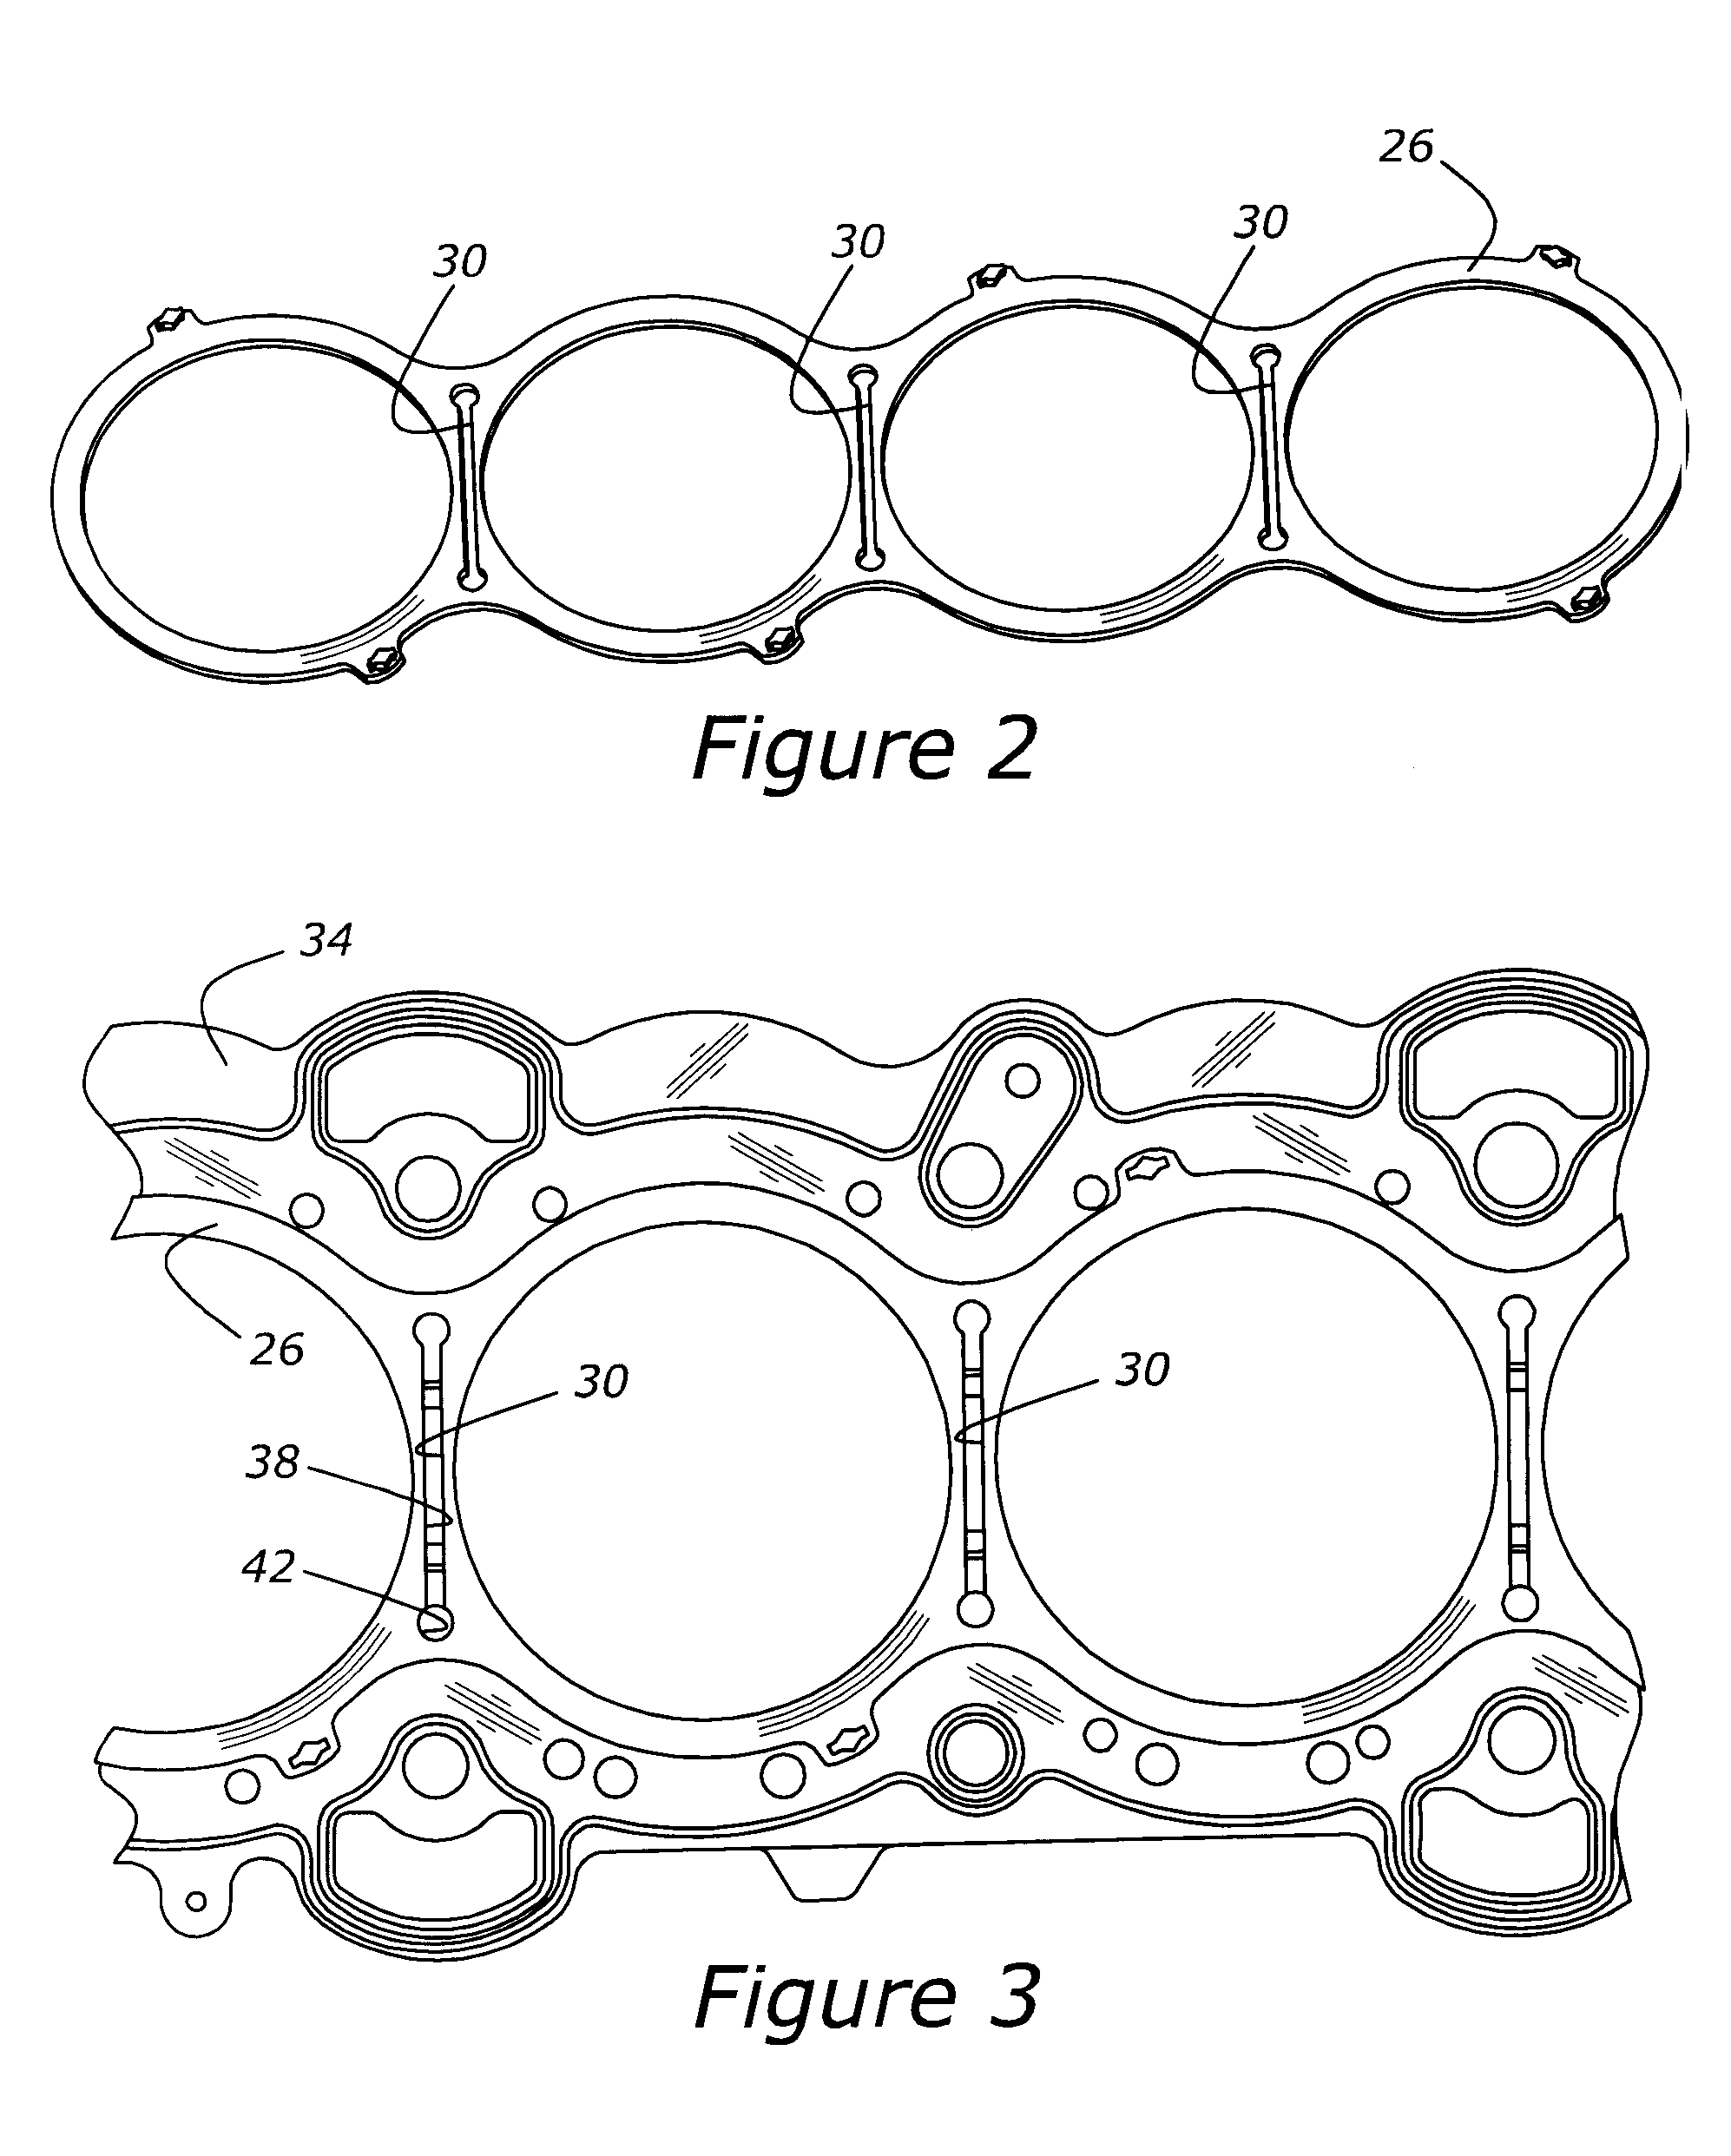 Internal combustion engine with direct cooling of cylinder components